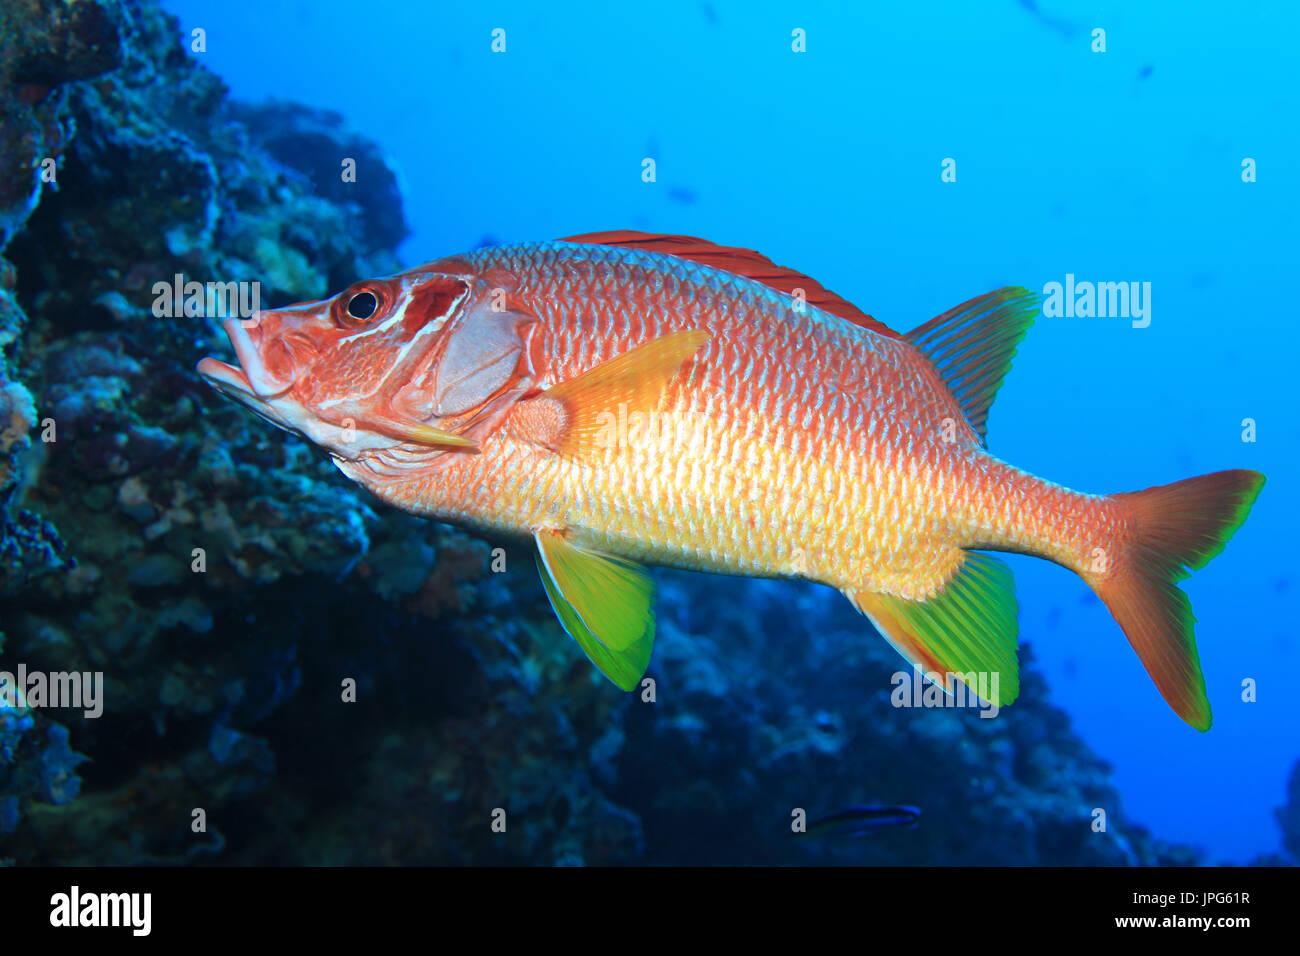 Giant Squirrelfish (Sargocentron spiniferum) underwater in the tropical coral reef of the indian ocean Stock Photo